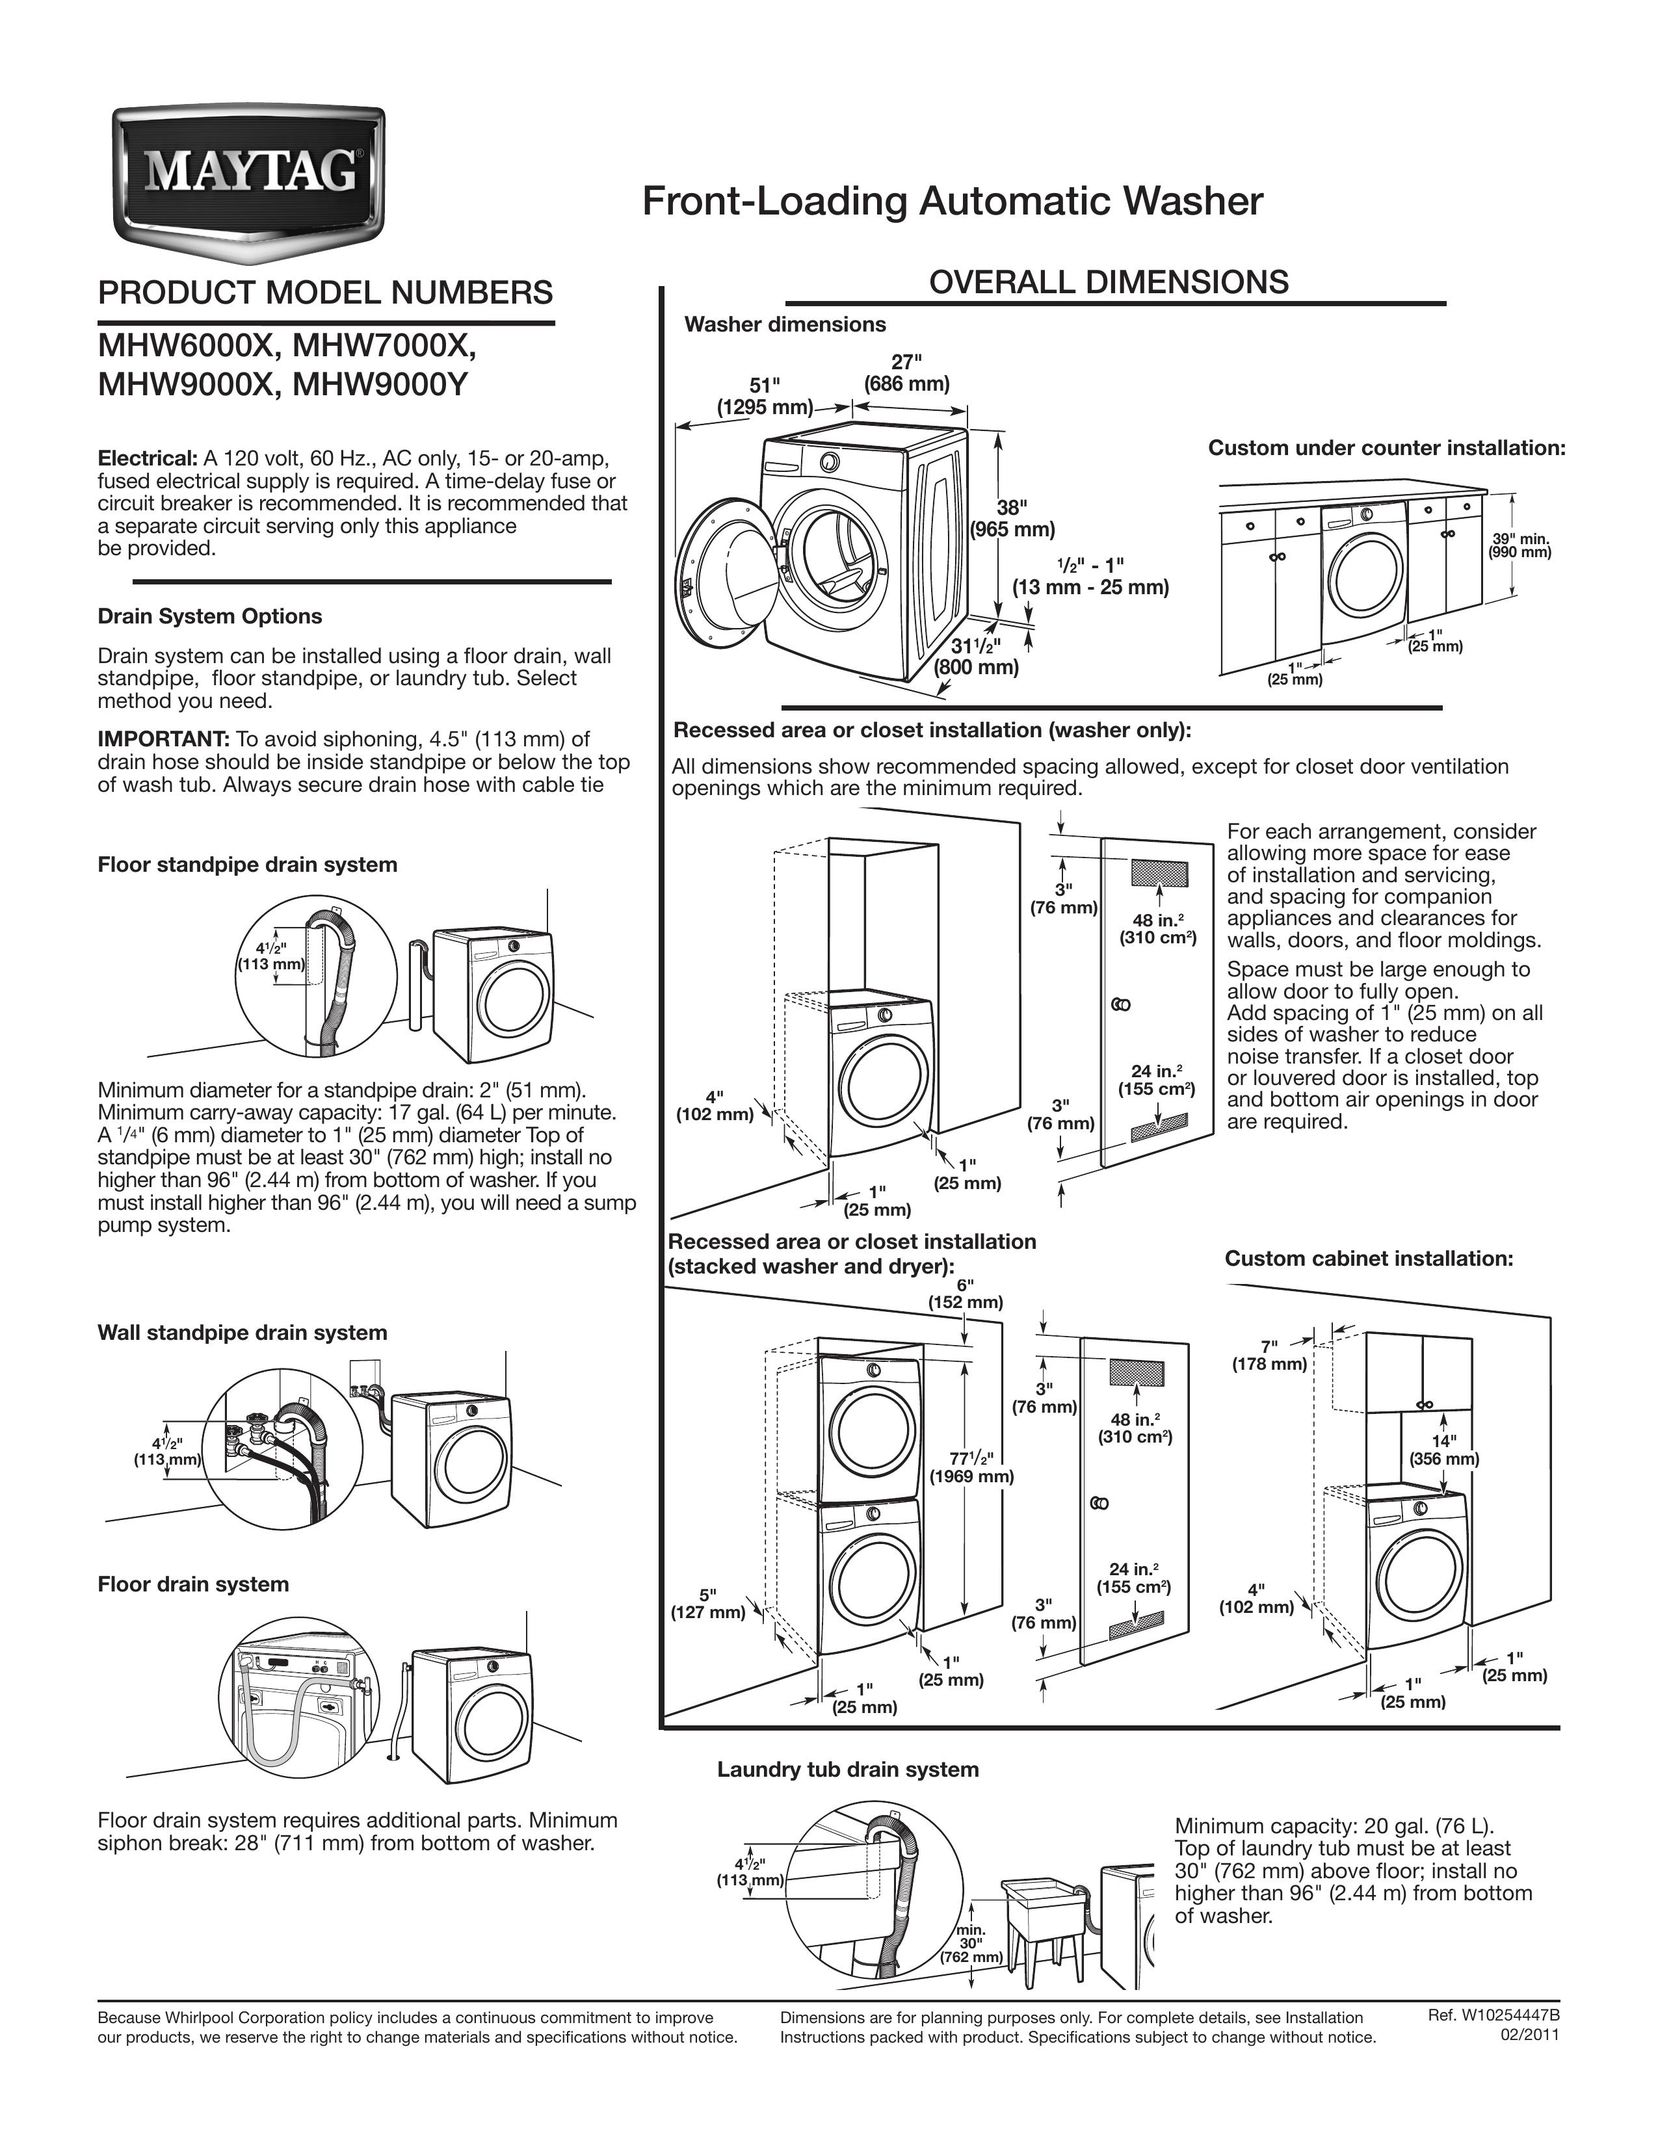 Maytag MHW7000X Ice Maker User Manual